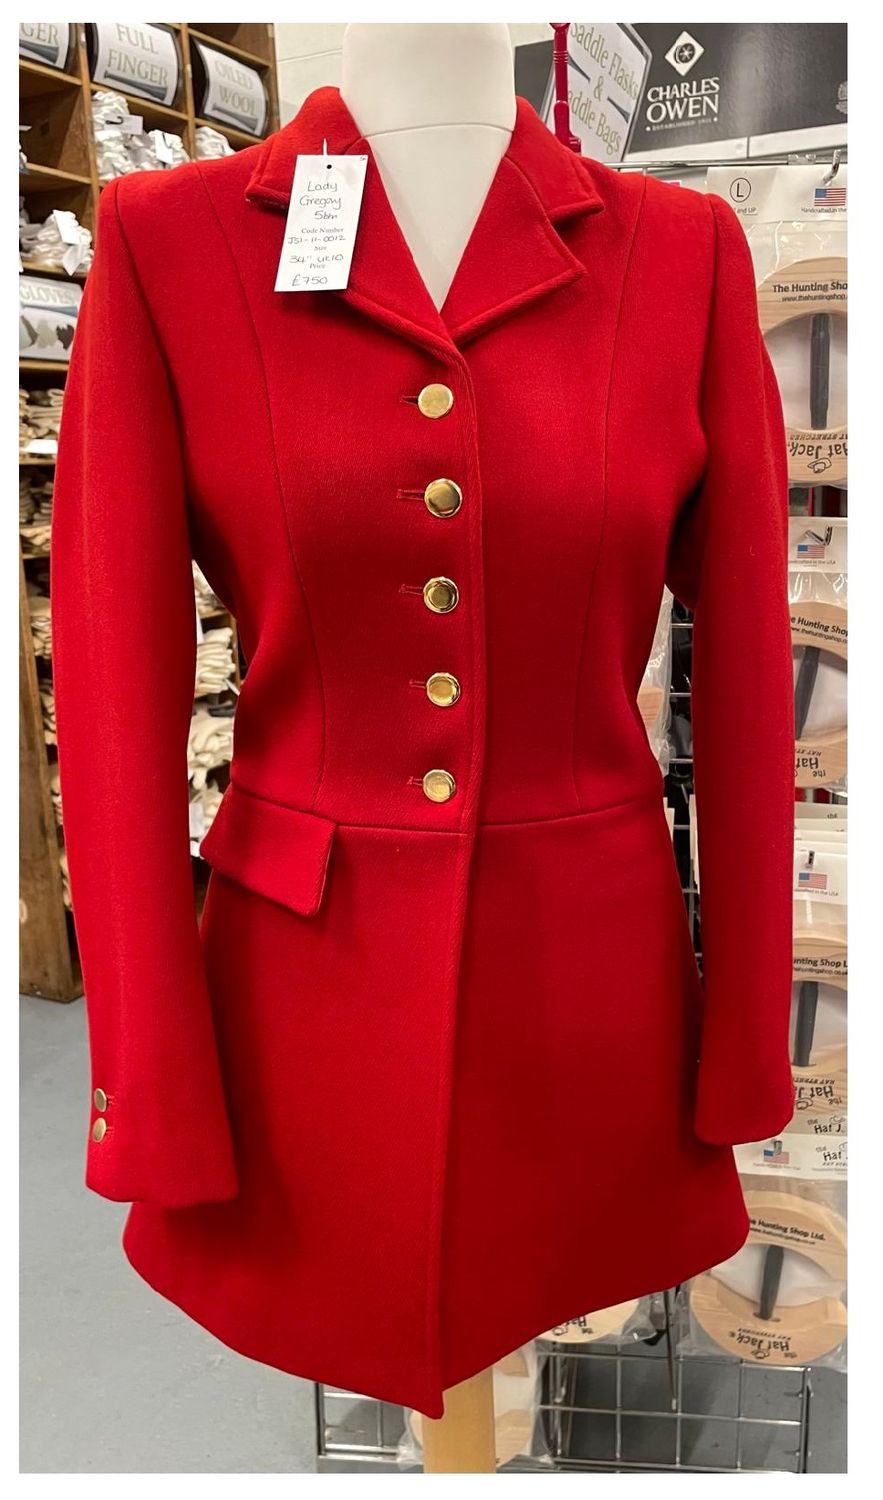 Ladies 34" Lady Gregory, Scarlet 5 Button Hunt Coat